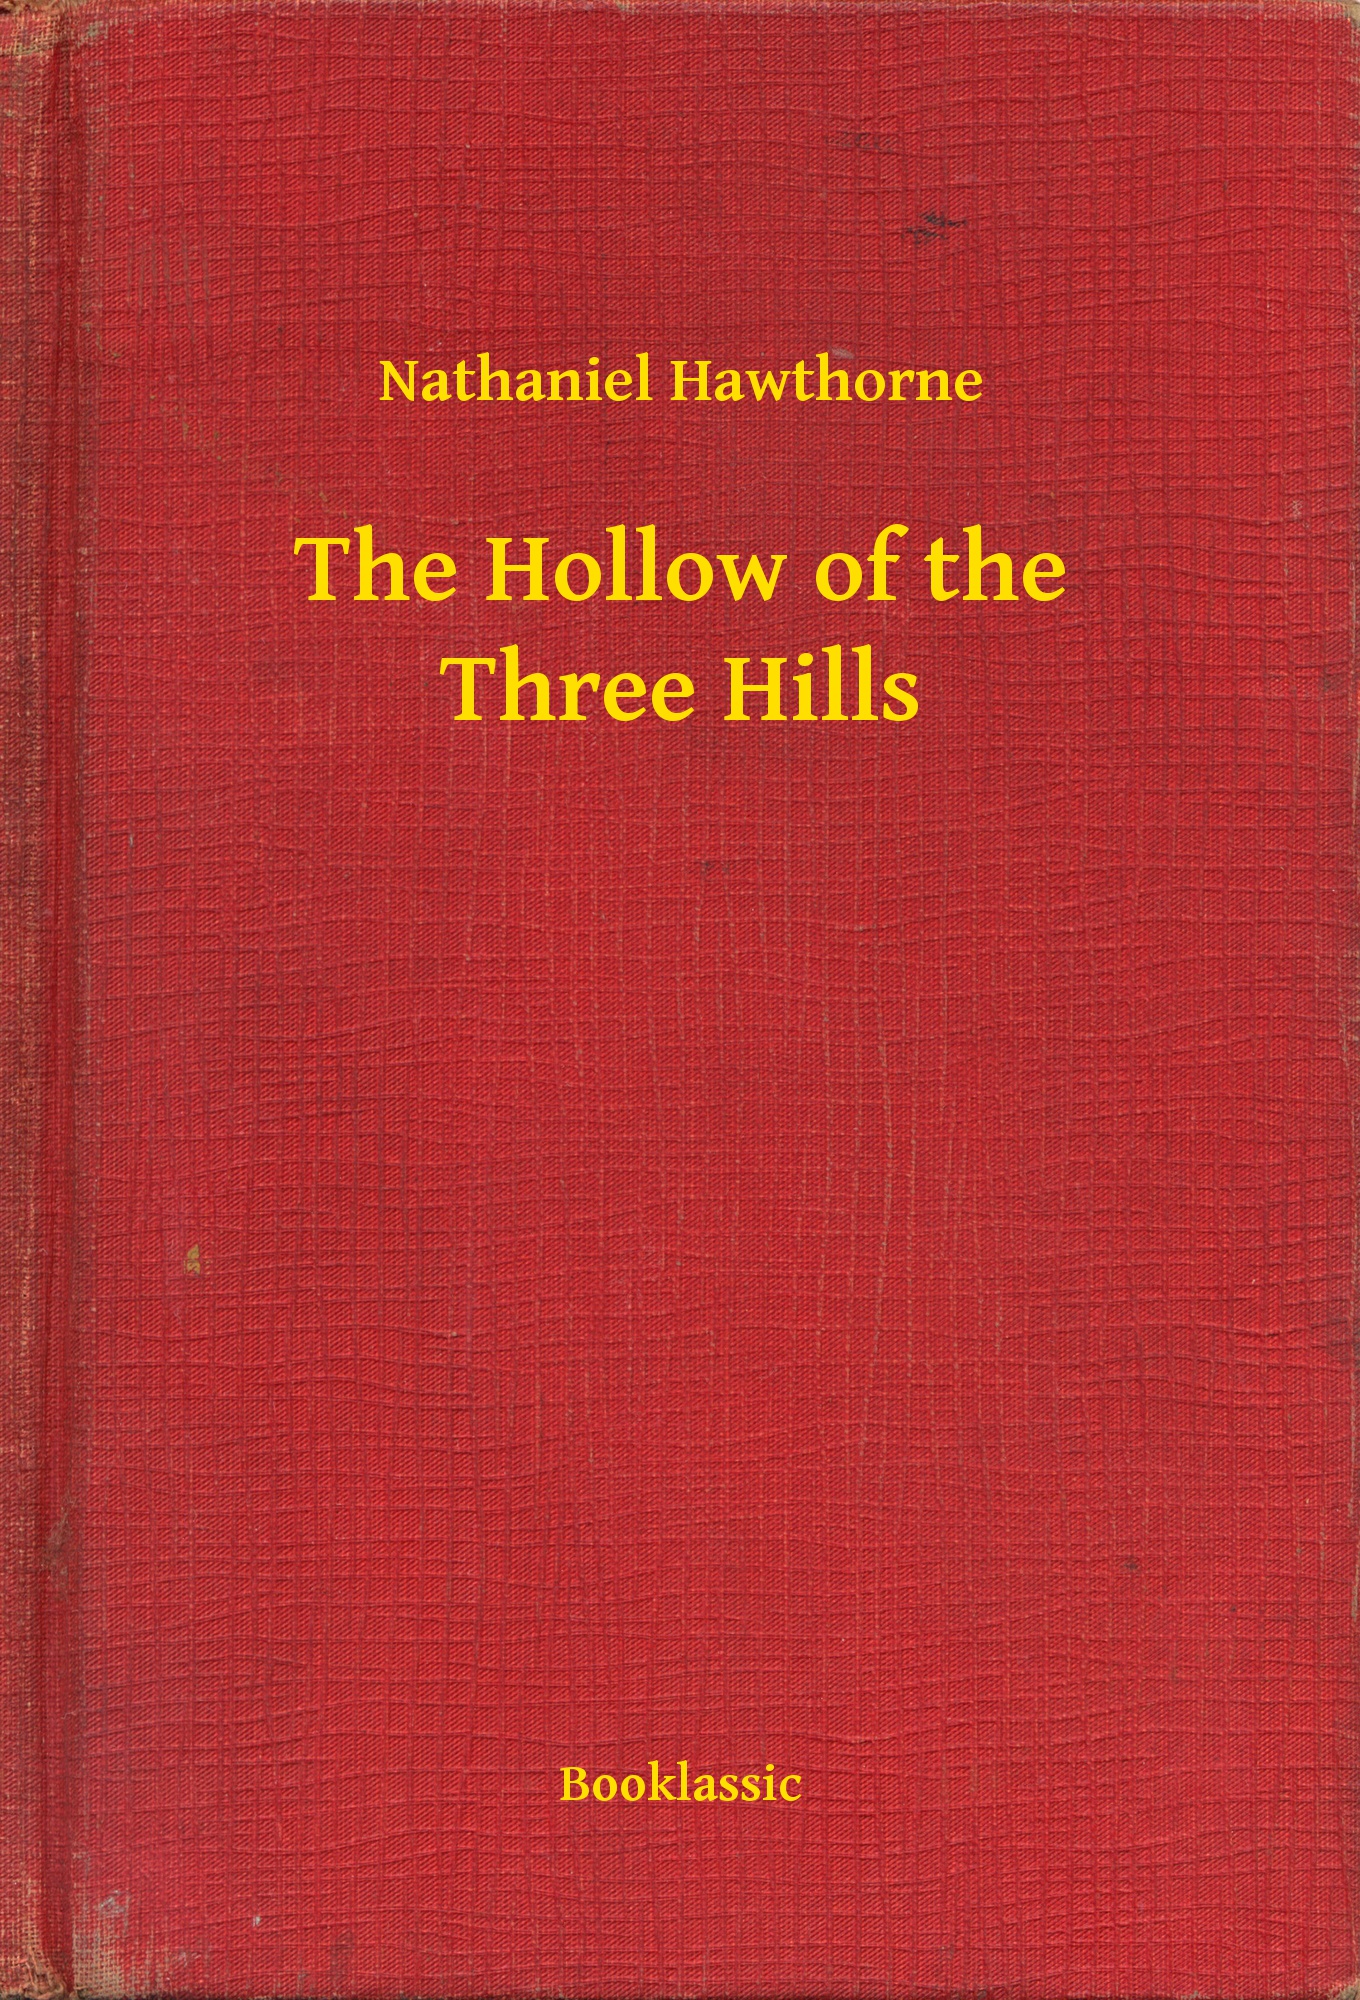 The Hollow of the Three Hills